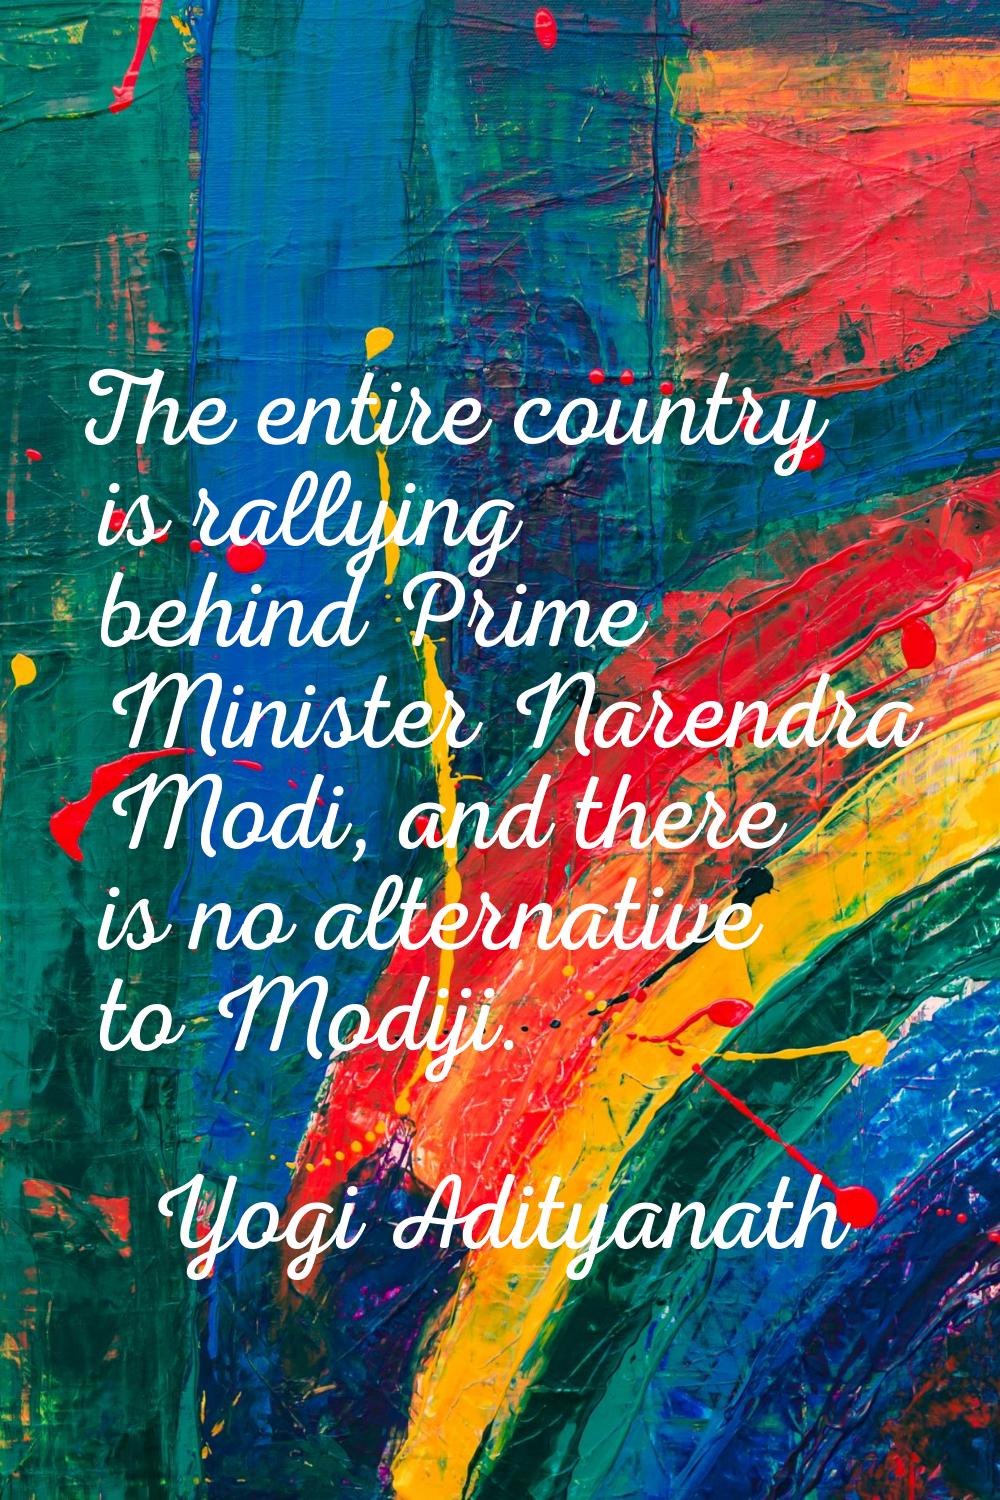 The entire country is rallying behind Prime Minister Narendra Modi, and there is no alternative to 